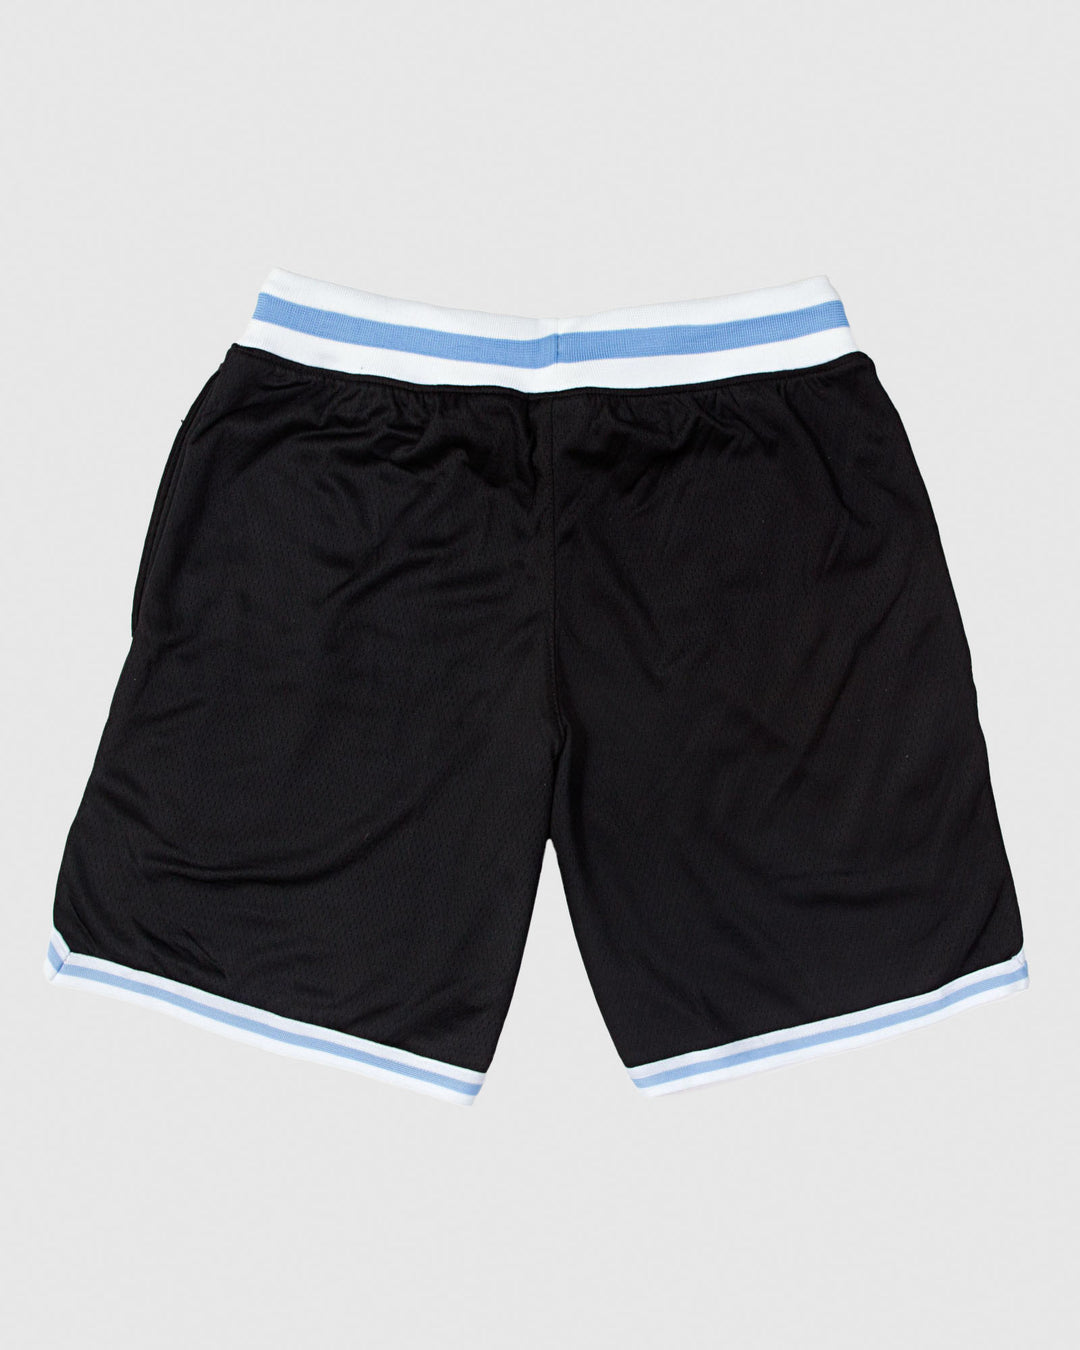 Back of black mesh shorts with blue and white waistband#color_black